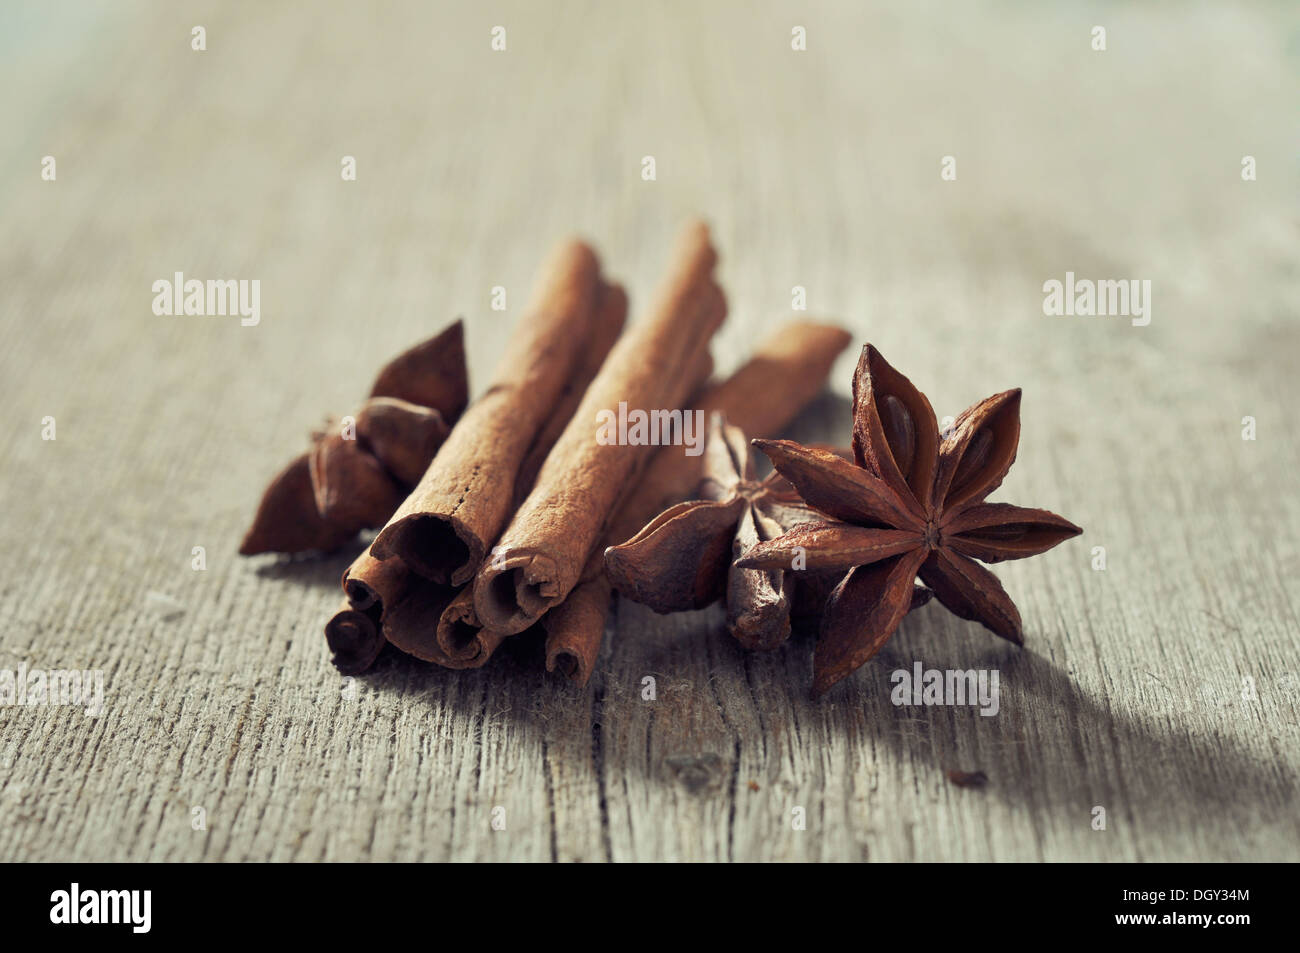 Cinnamon sticks with anis stars closeup on wooden background Stock Photo